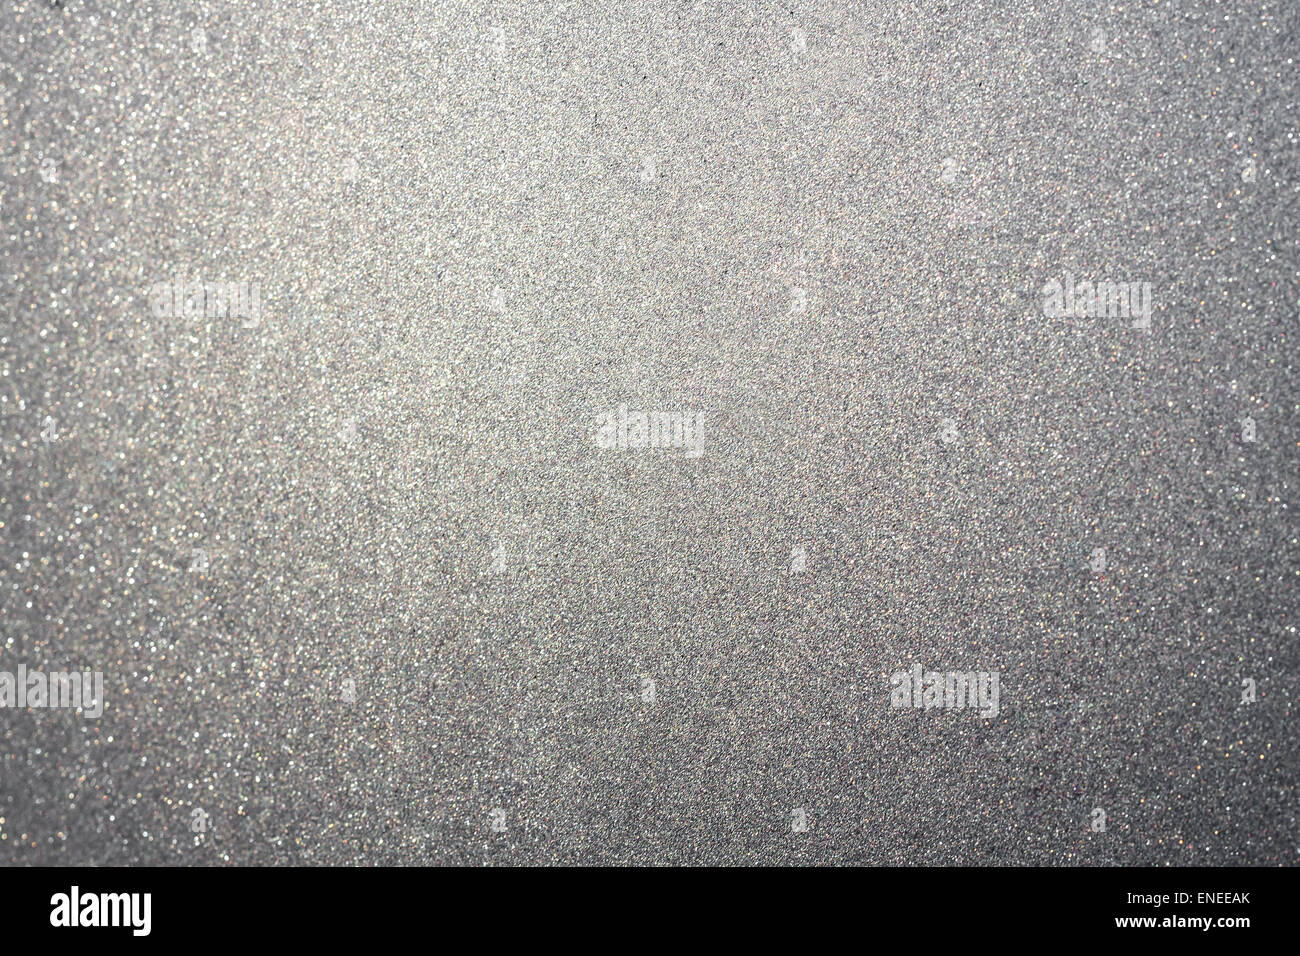 Abstract silver or gray dust or sand background with blur edges of image Stock Photo